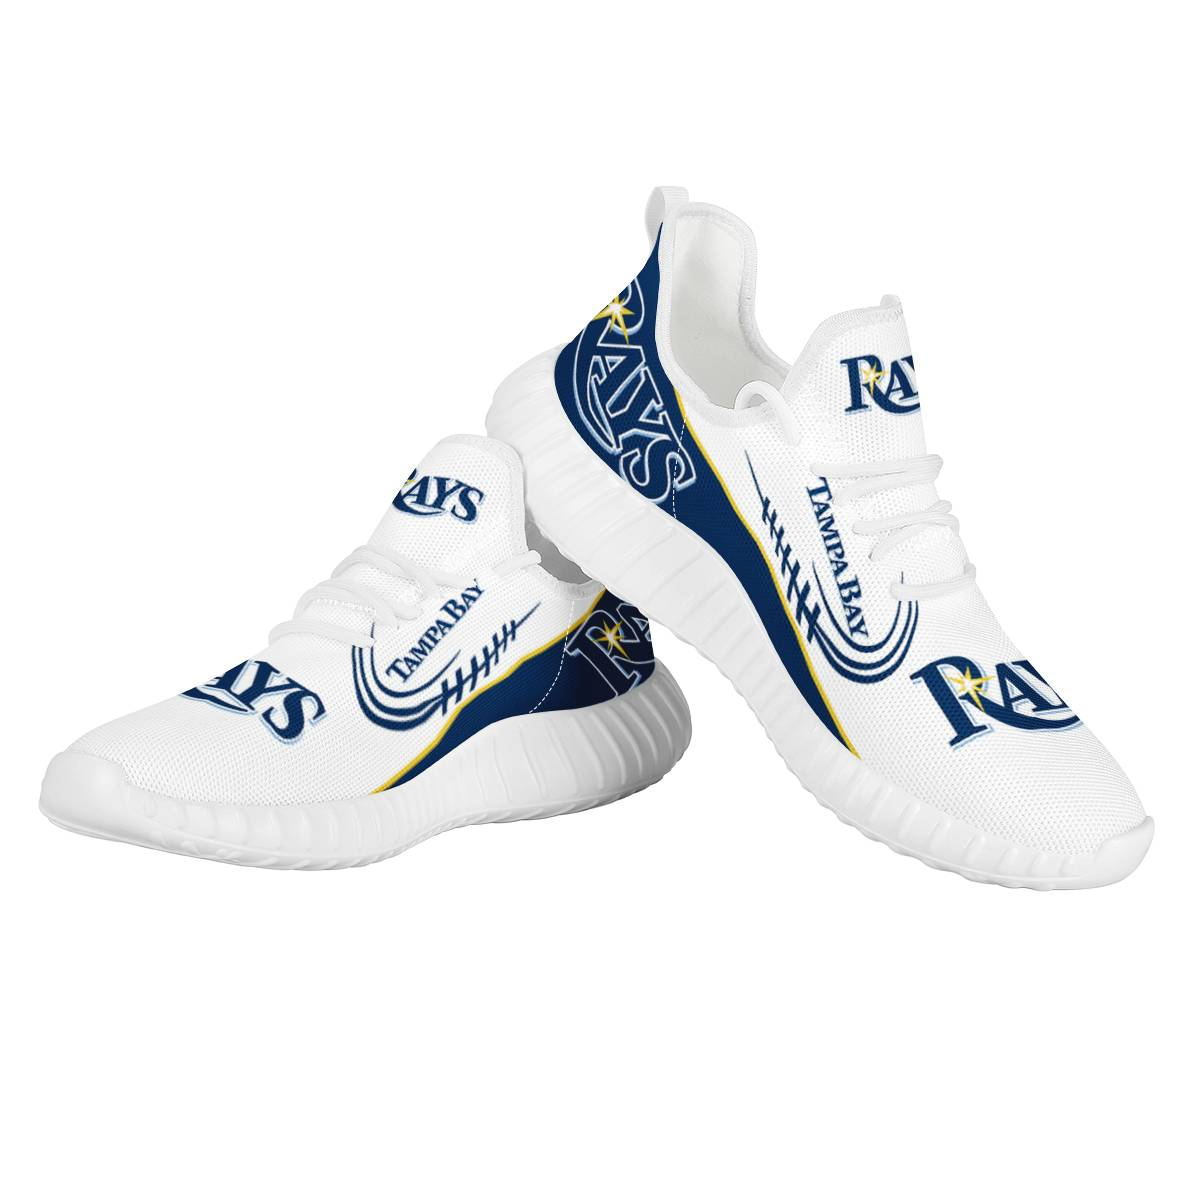 Women's MLB Tampa Bay Rays Mesh Knit Sneakers/Shoes 003